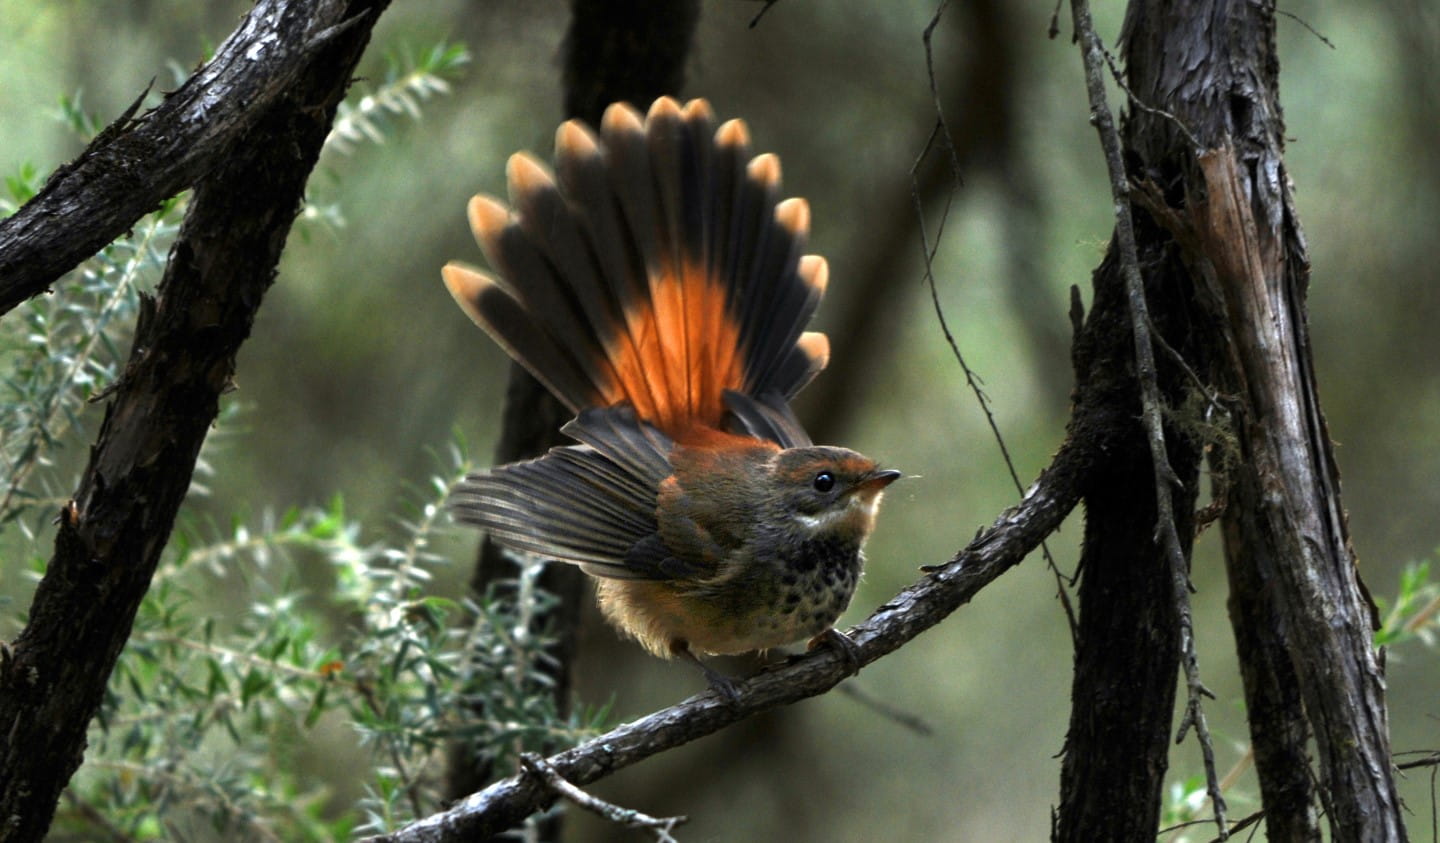 A Rufous Fantail showing off its tail feathers.